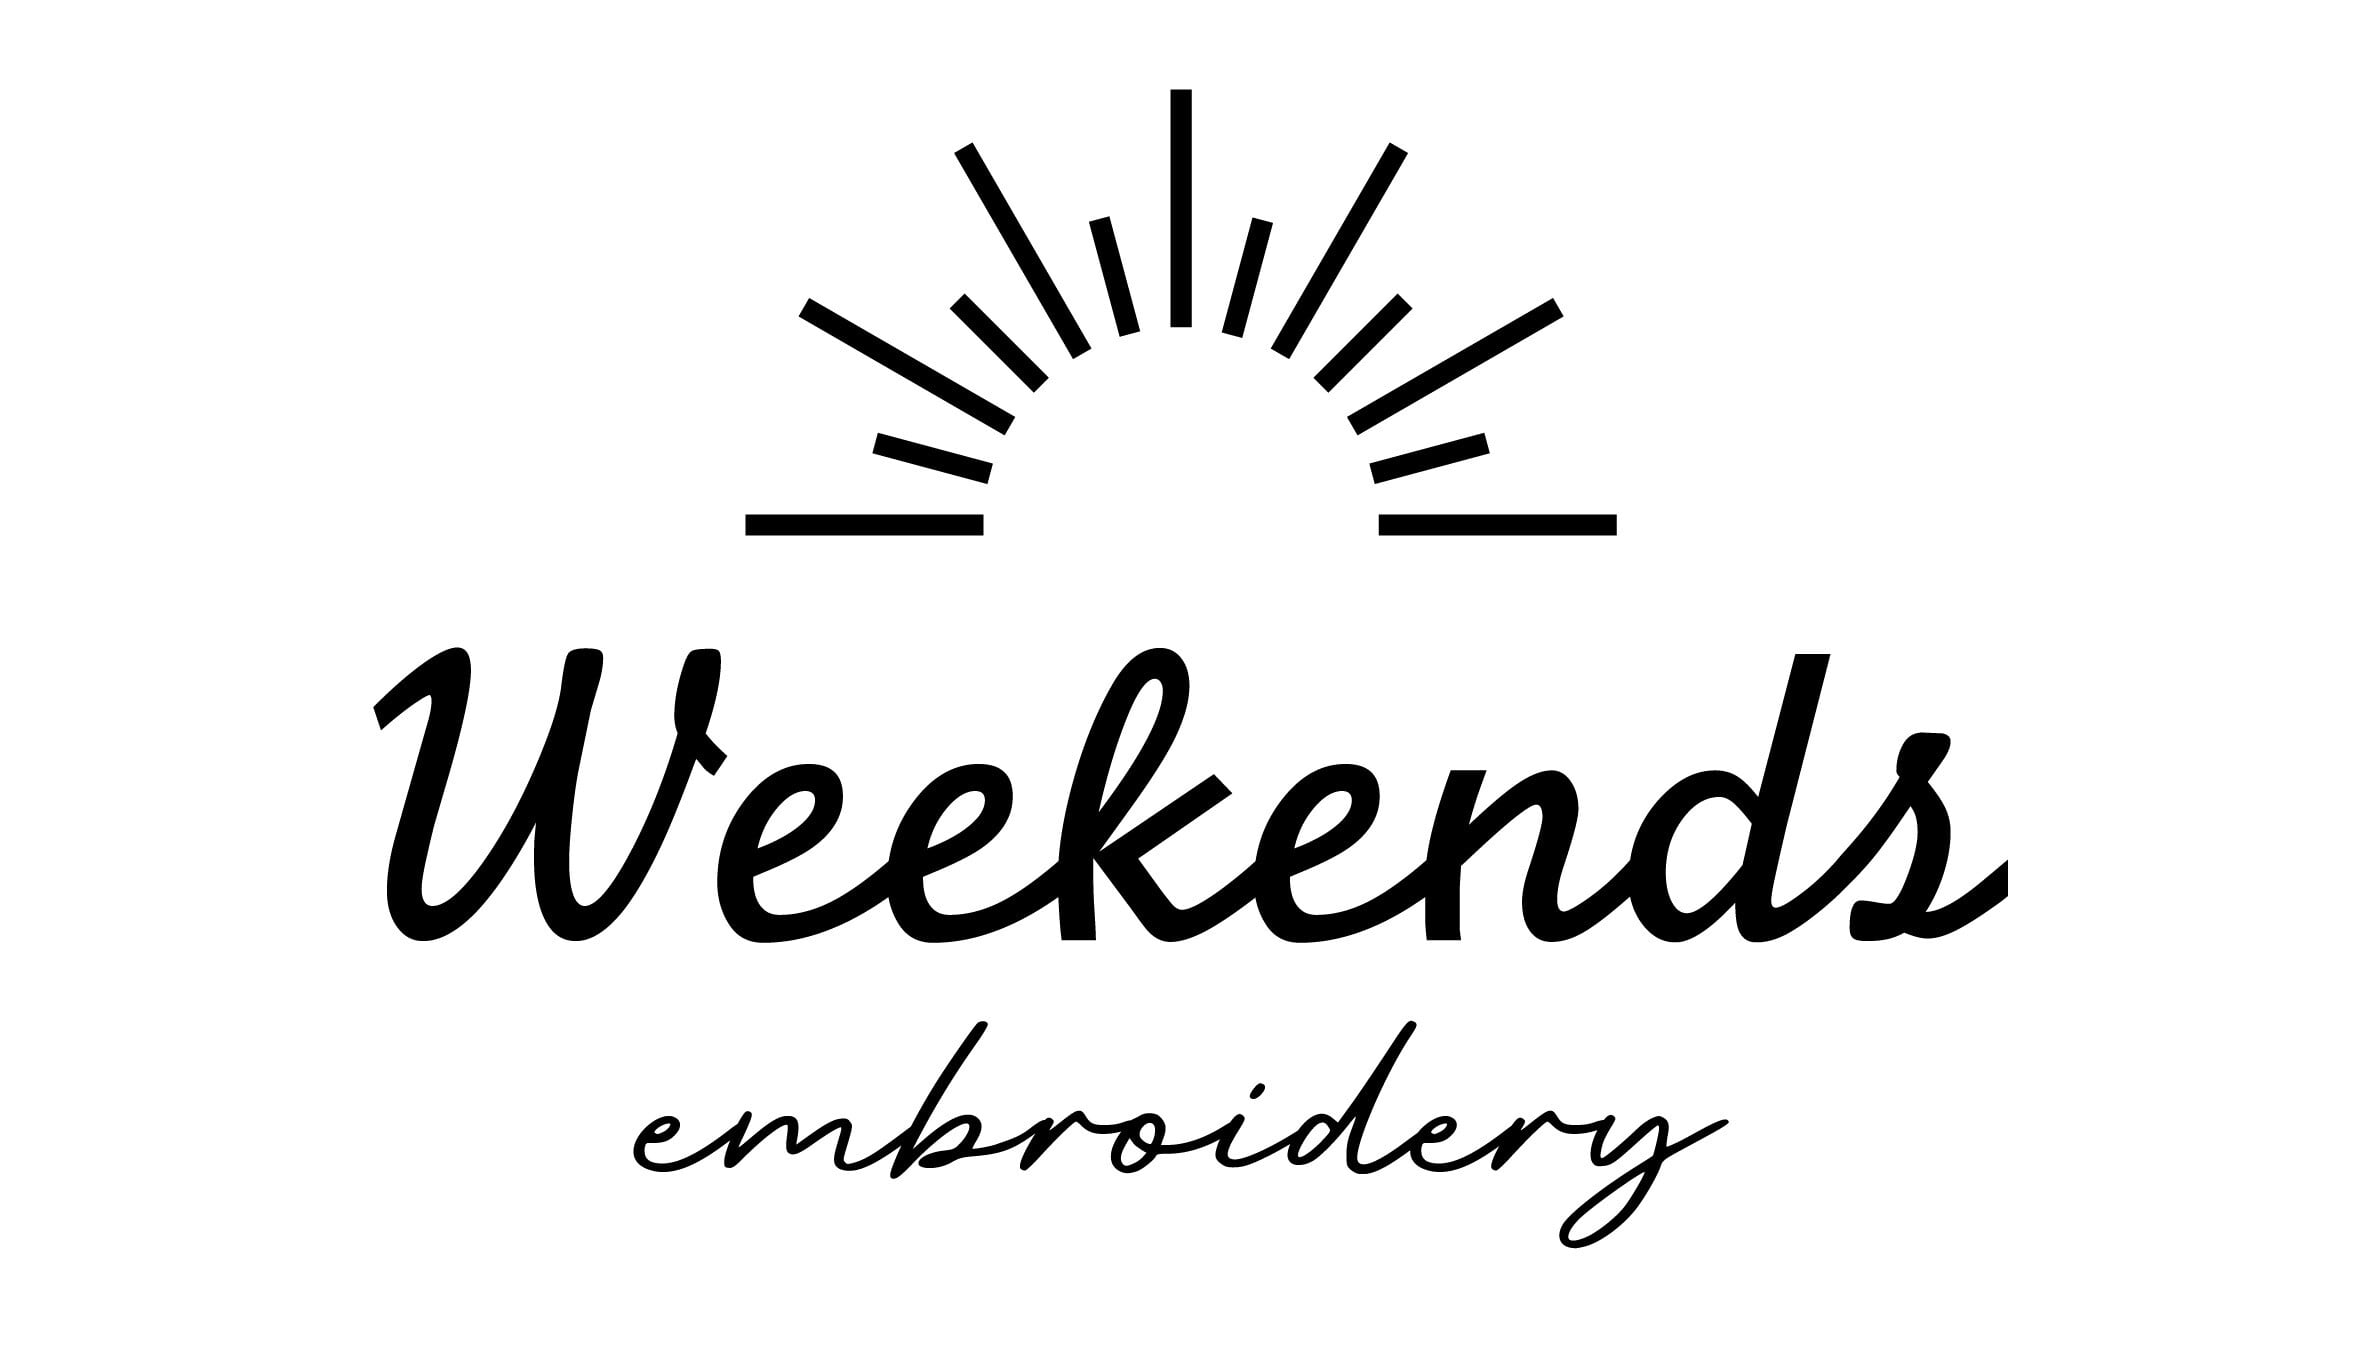 Weekends embroidery